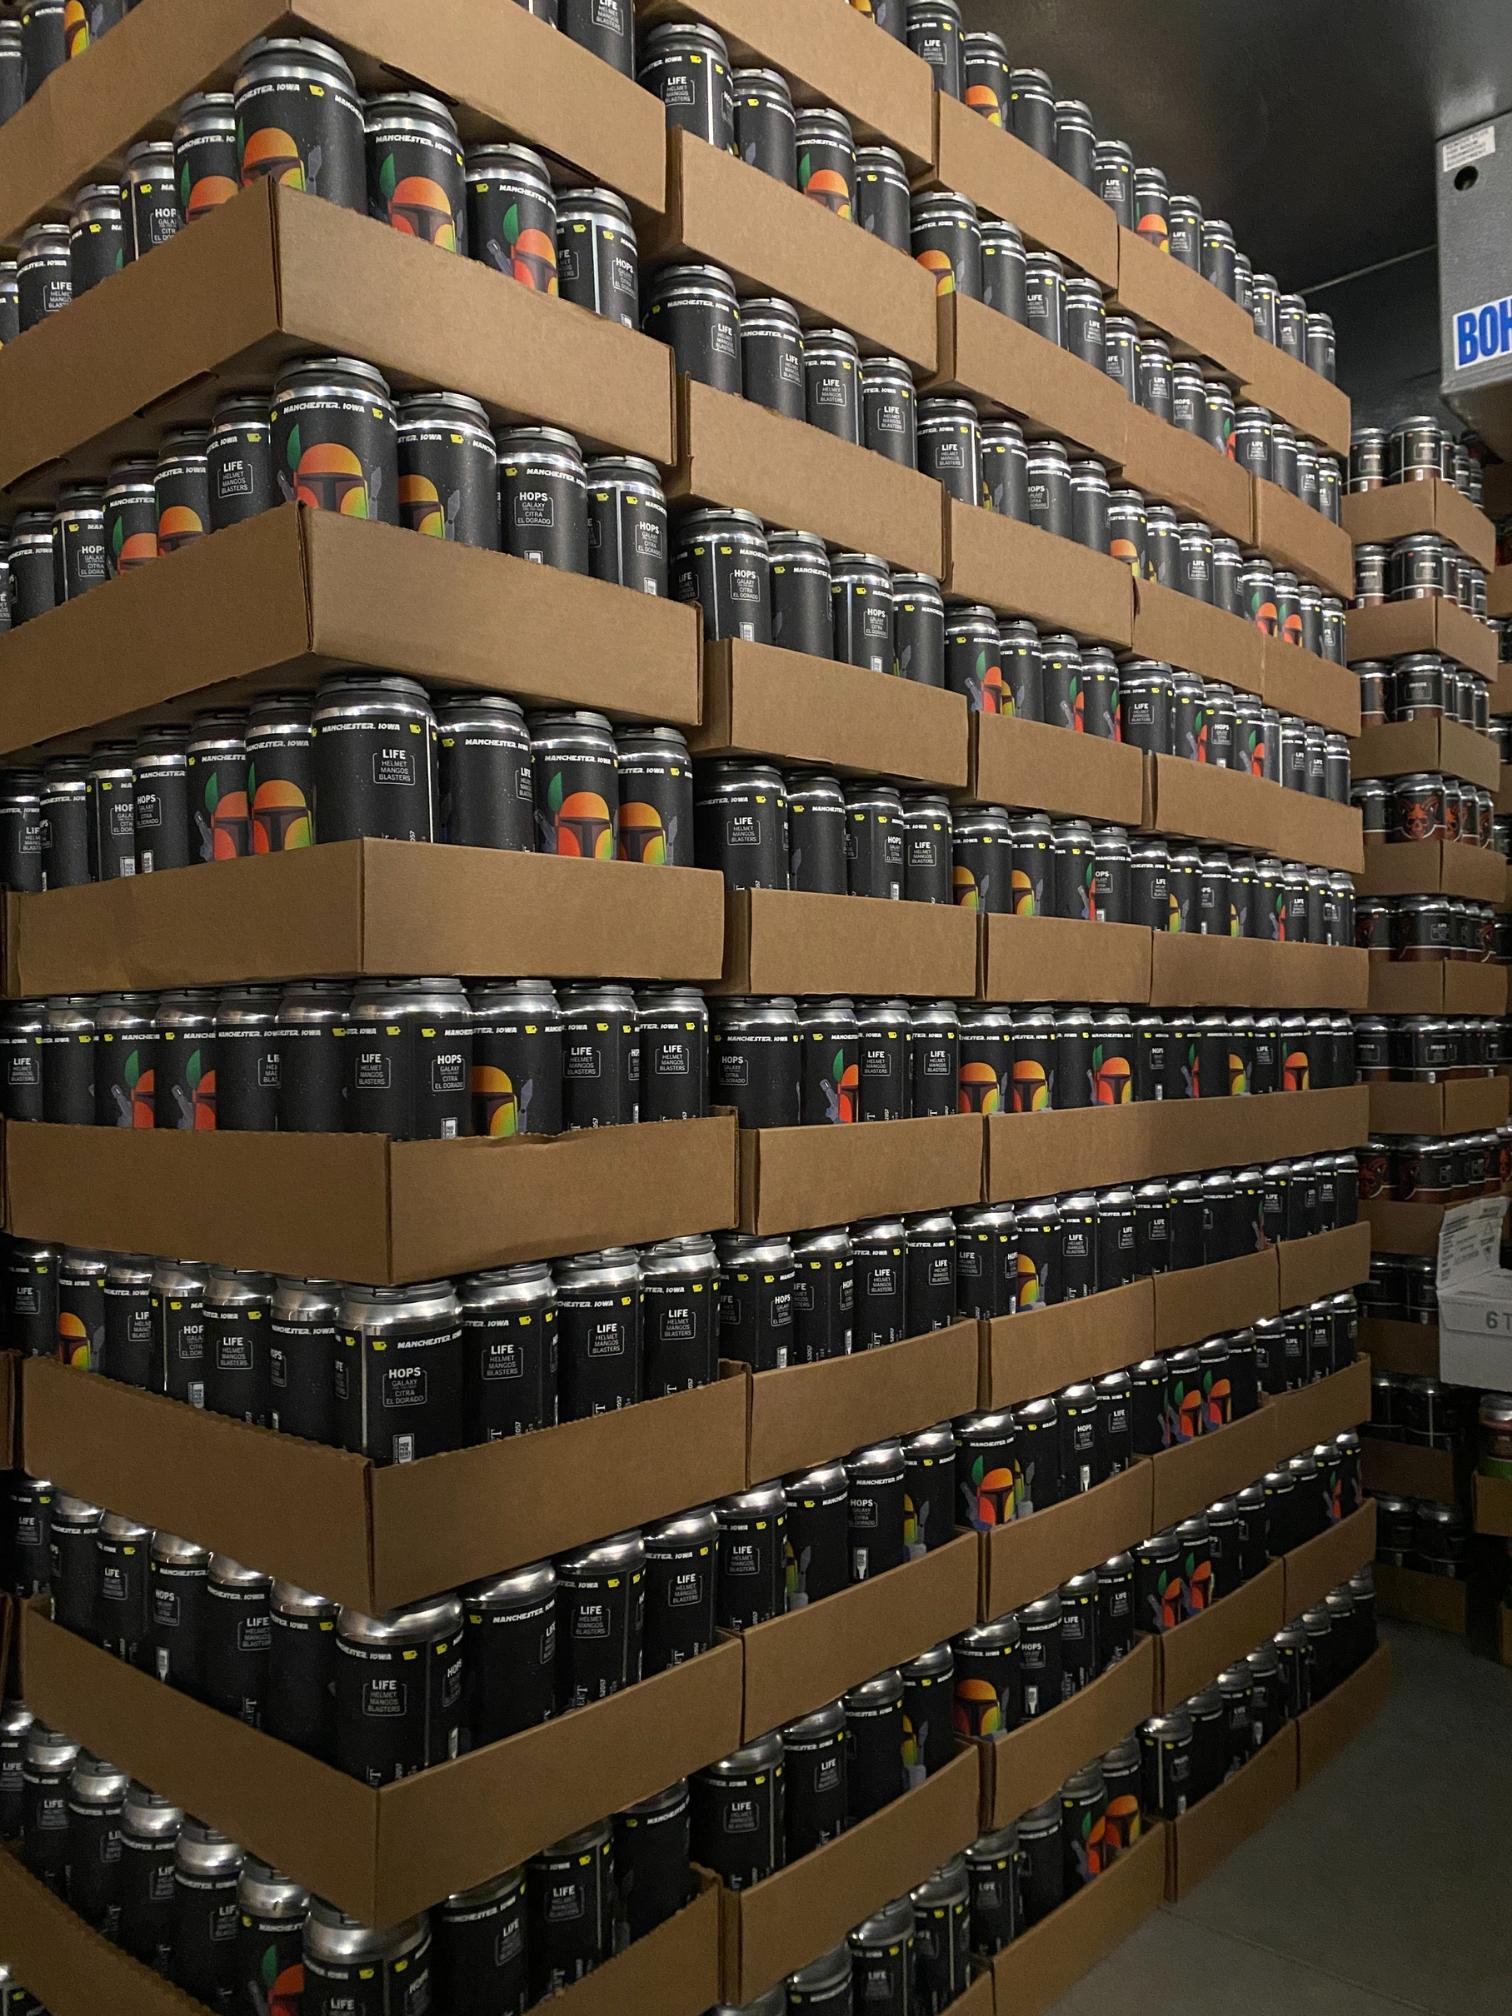 A big stack of cans stands ready for sale.